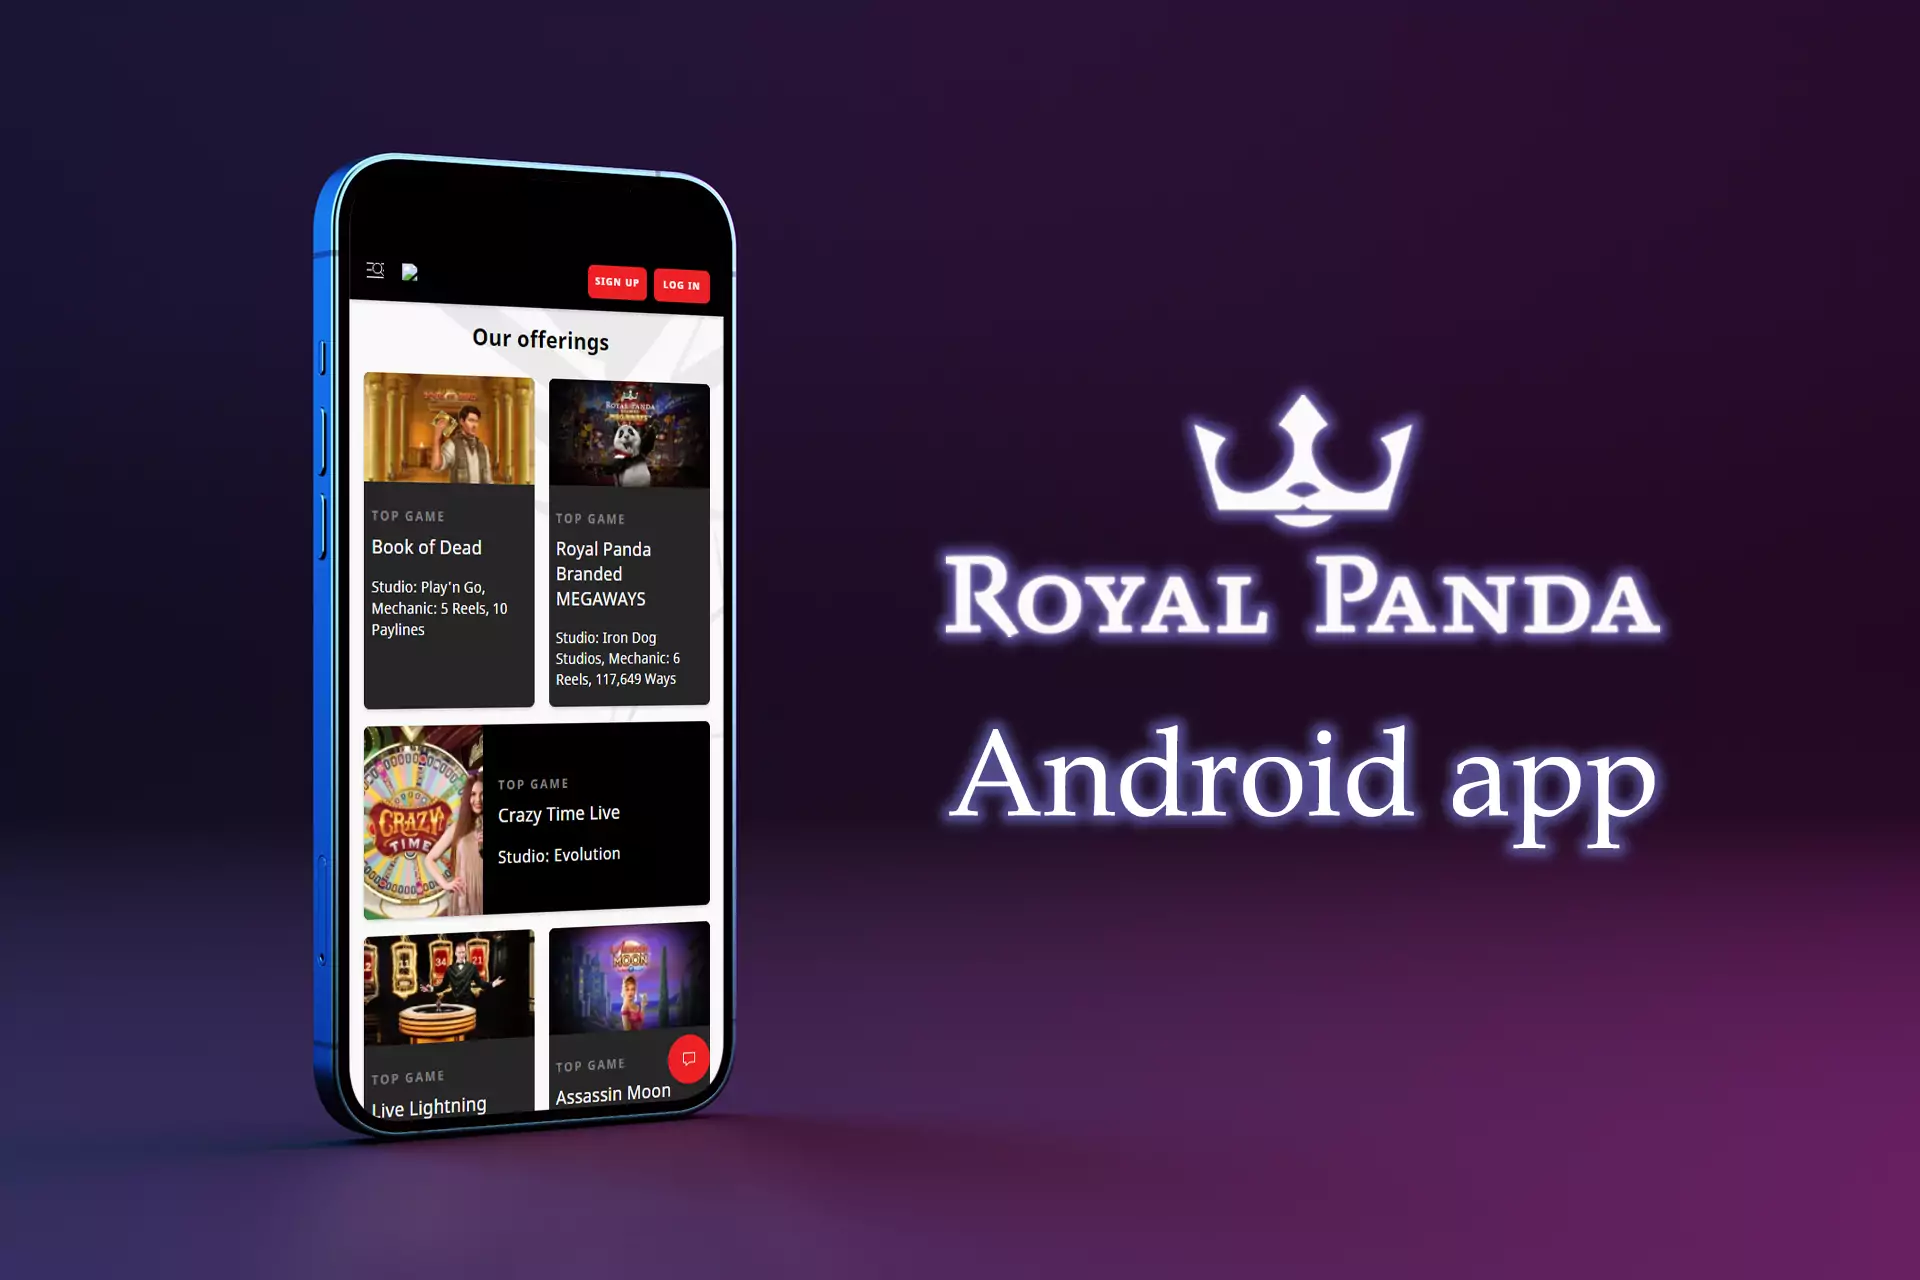 For the users who prefer playing games using a smartphone, the Royal Panda team released the Android app.